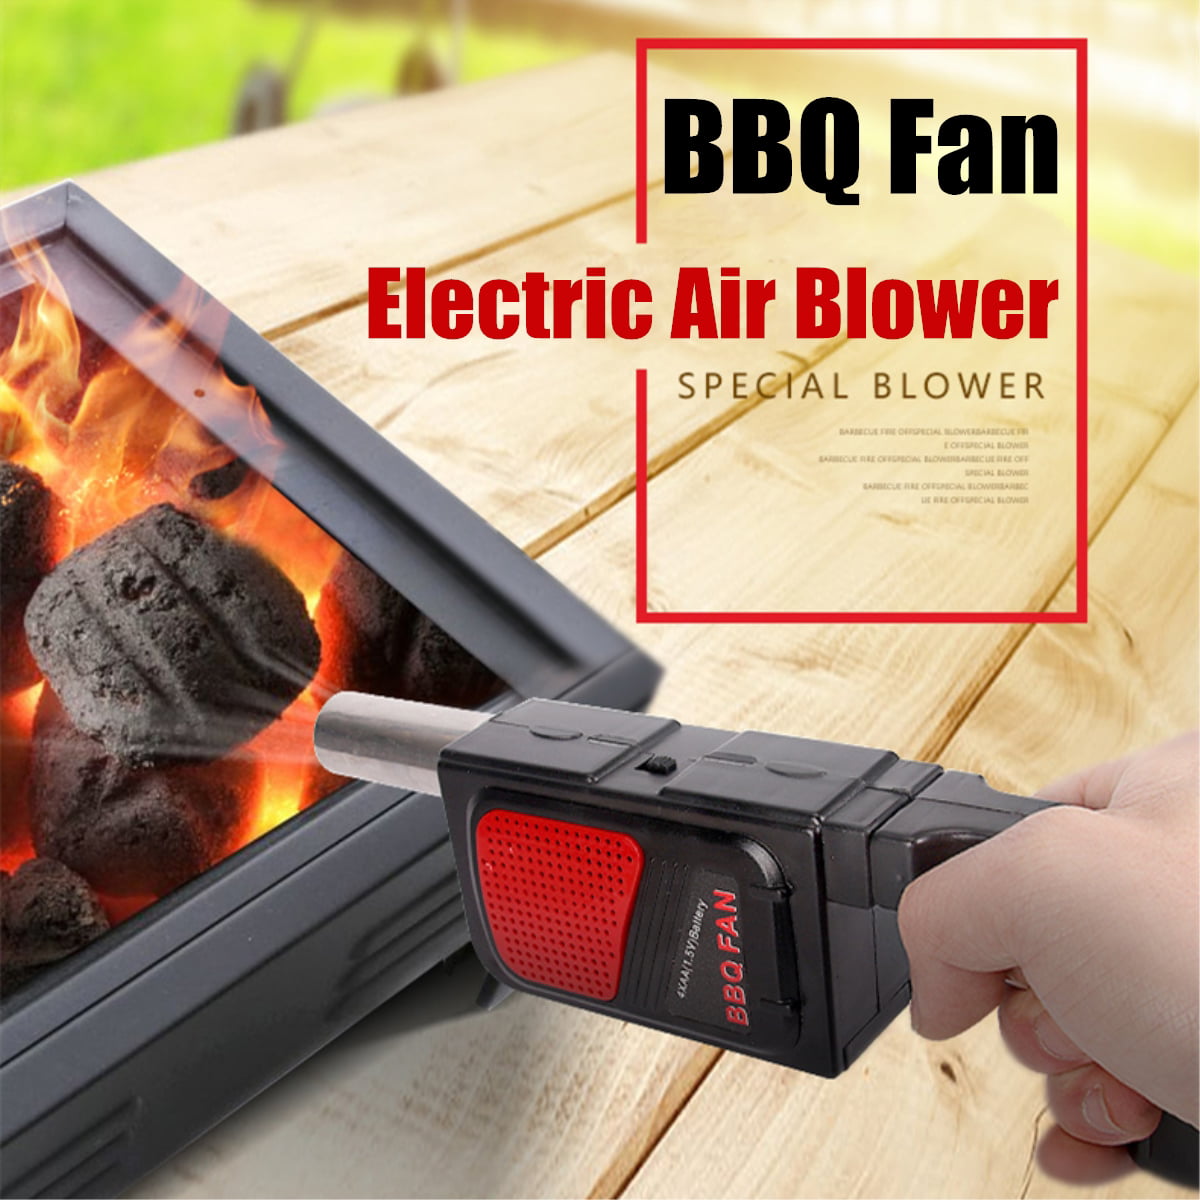 BBQ Fire Fan Air Blower Bellows Portable Outdoor Camping Flame Barbecue Picnic 